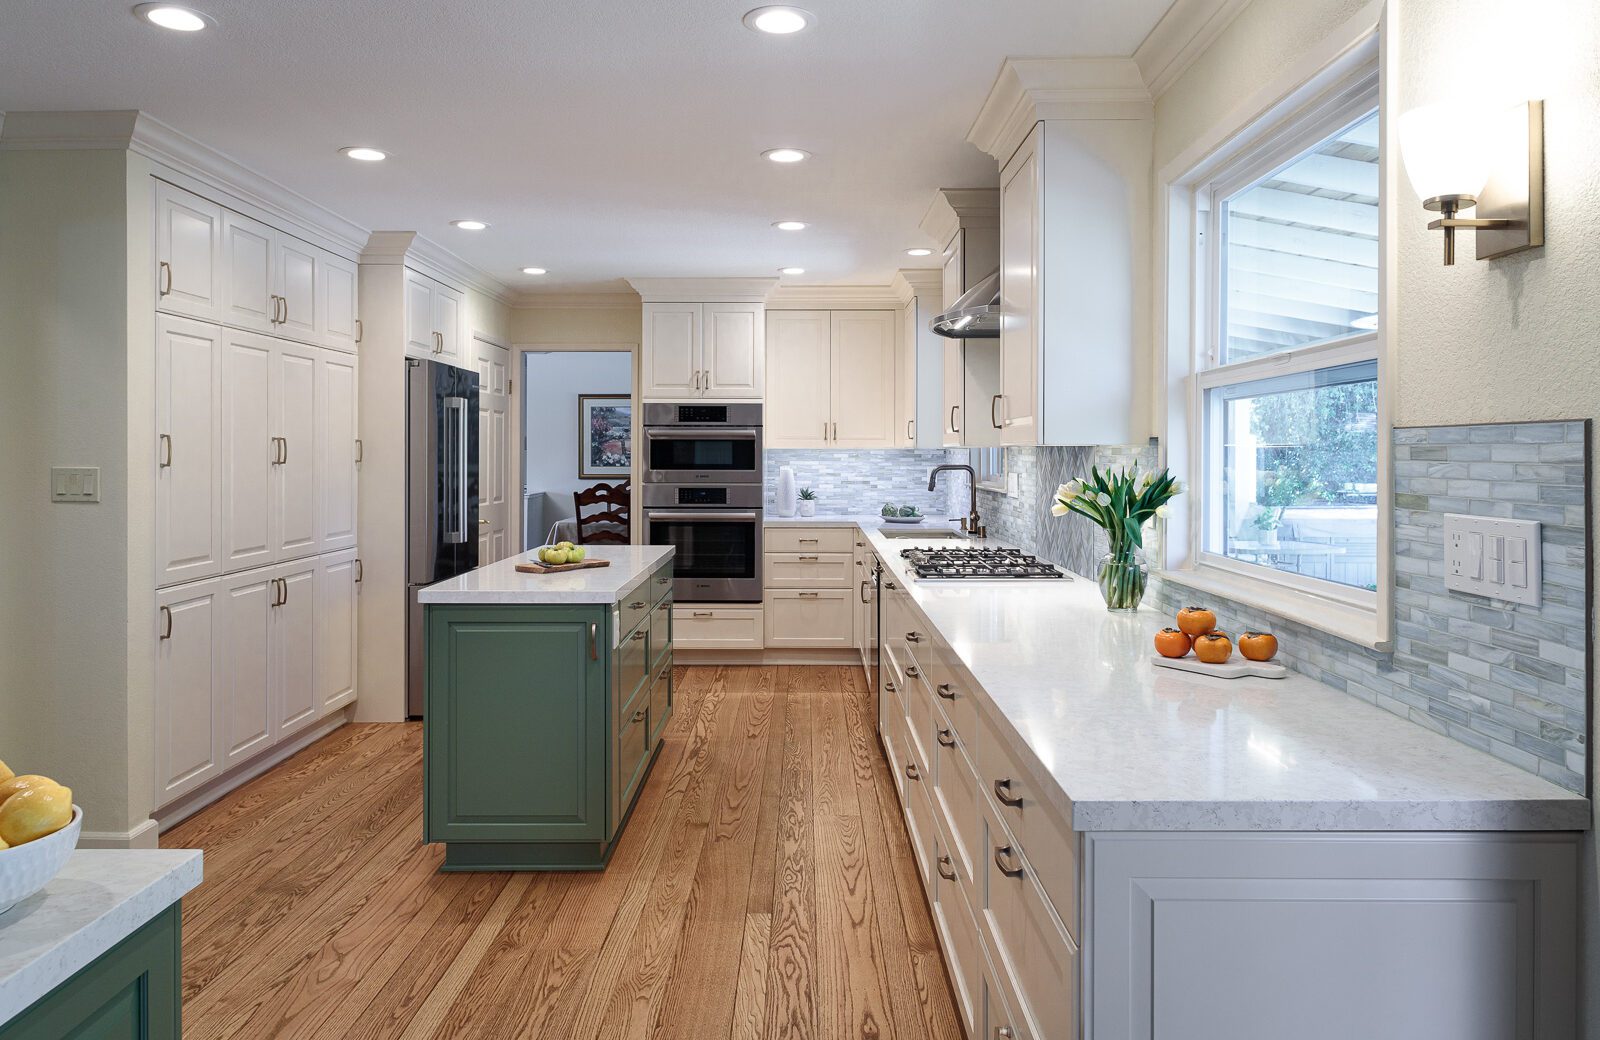 white painted cabinets, green island, wood floors